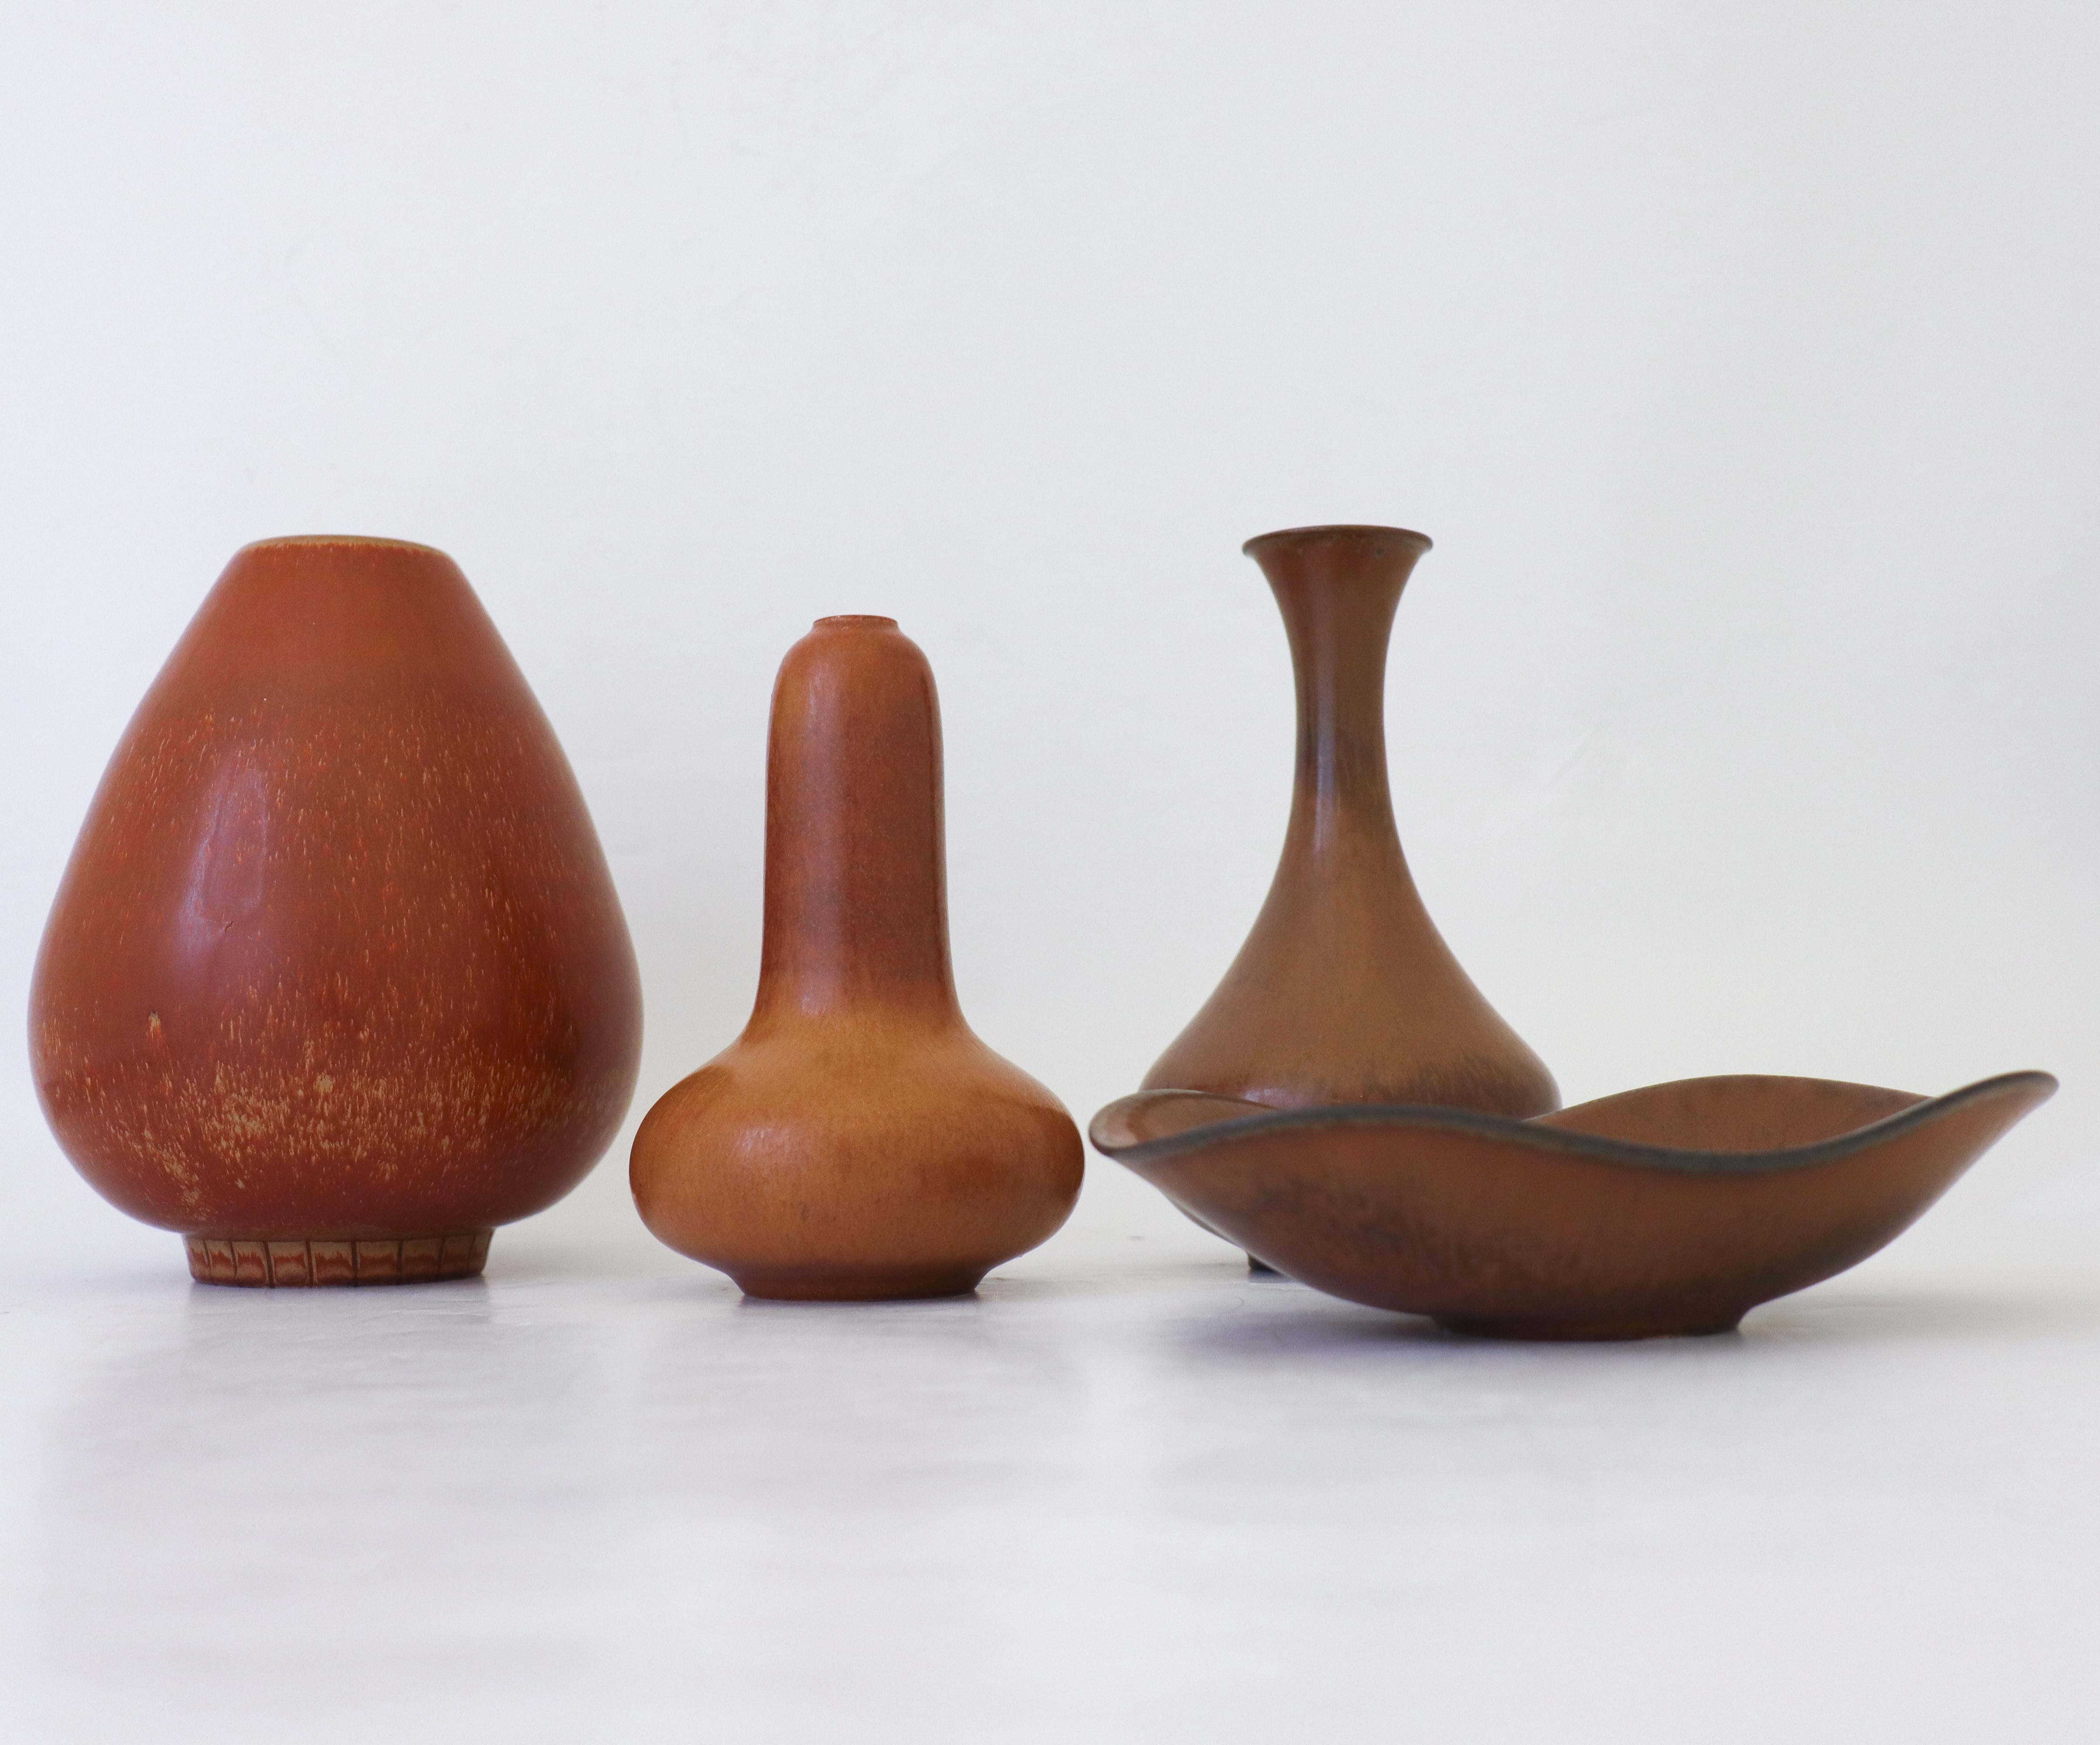 A group of three vases and a bowl in a brown glaze designed by CGunnar Nylund at Rörstrand. The vases are 16.5, 16.5, 7.5 and 14.5 cm high and the bowl is 17.5 x 11 cm in diameter. They are all in excellent condition and first quality. 

Gunnar